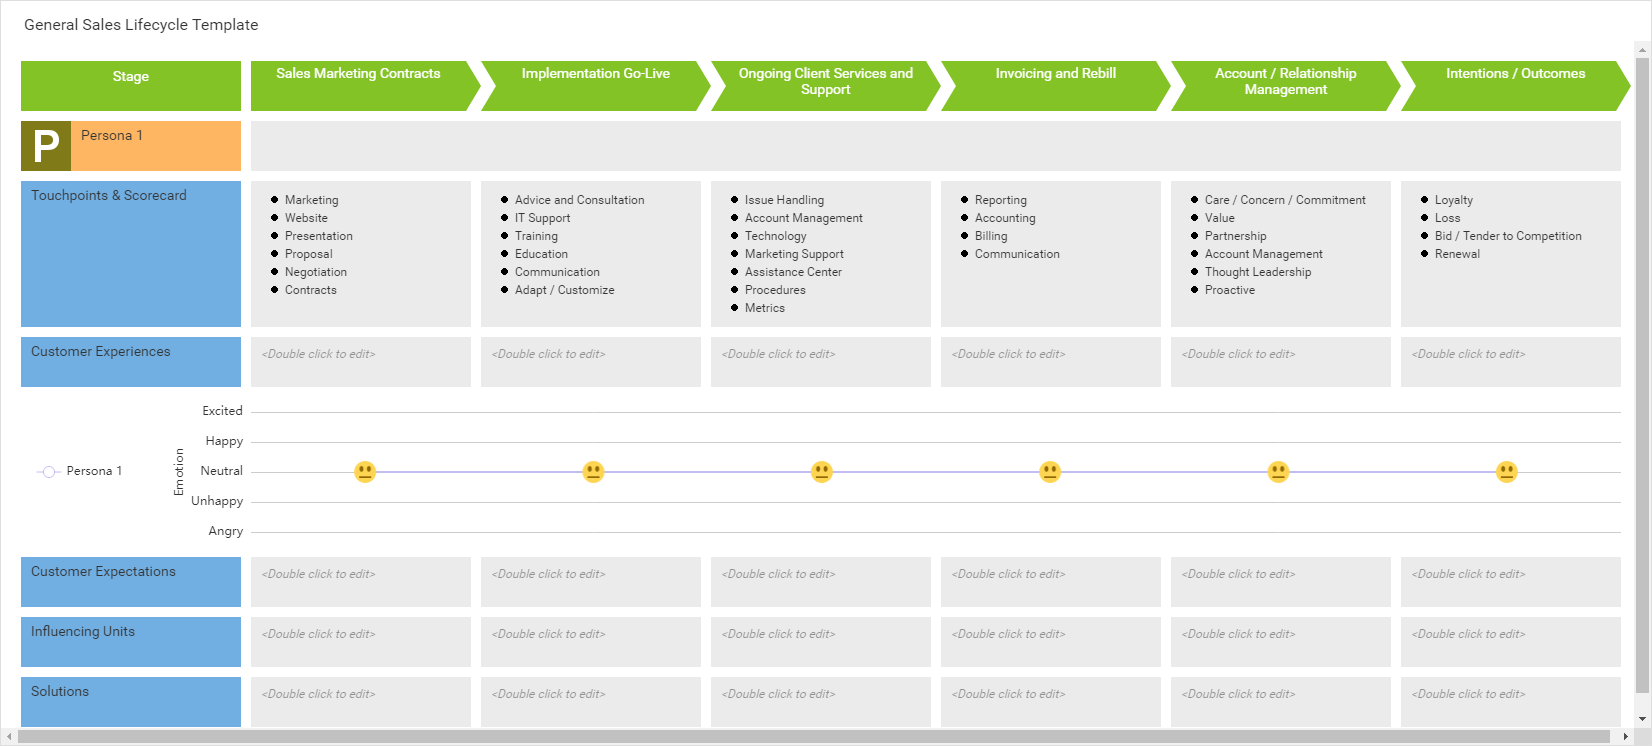 Customer Journey Mapping template: General Sales Lifecycle Template (Created by Diagrams's Customer Journey Mapping maker)